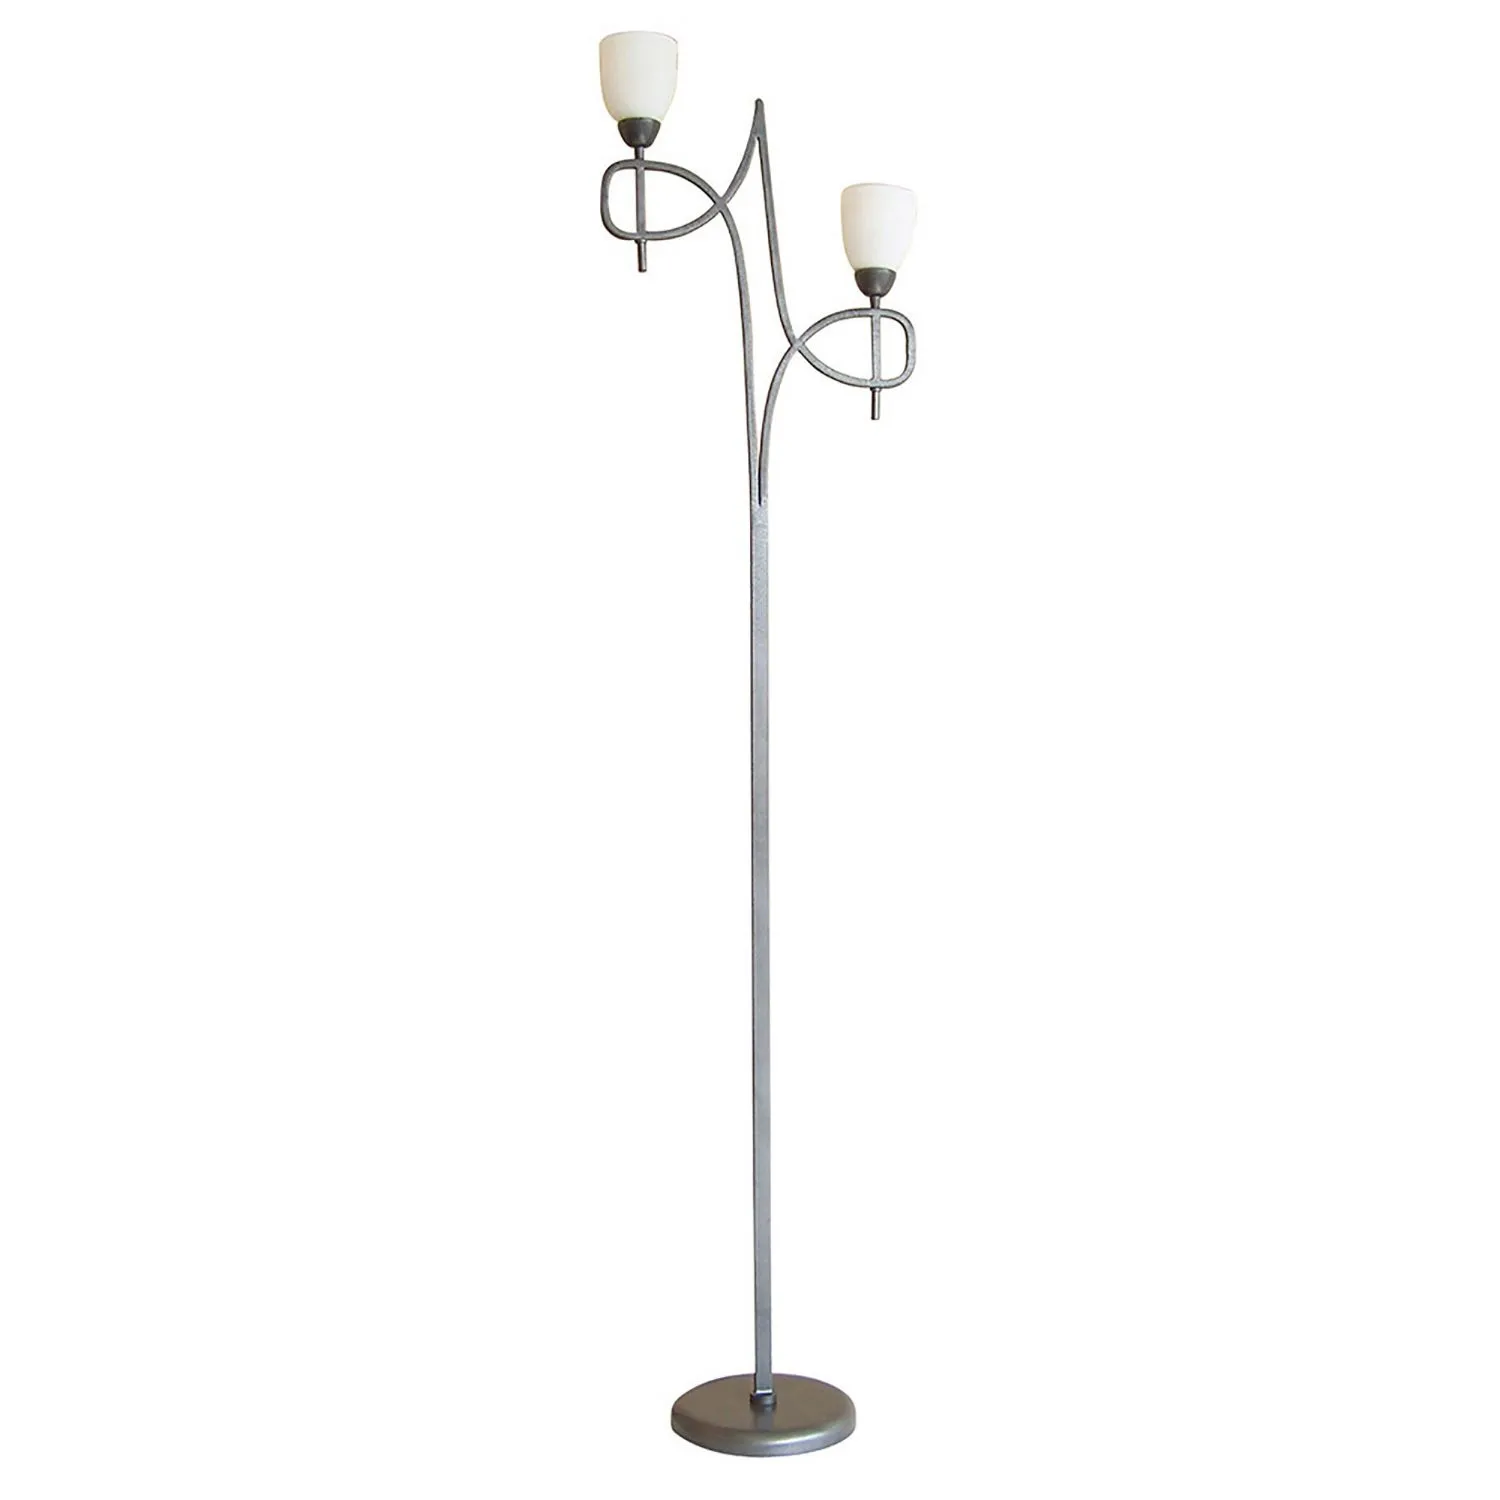 San Marino Floor Lamp With In Line Dimmer 2 Light E14 Tex Pewter Opal Glass, NOT LED CFL Compatible